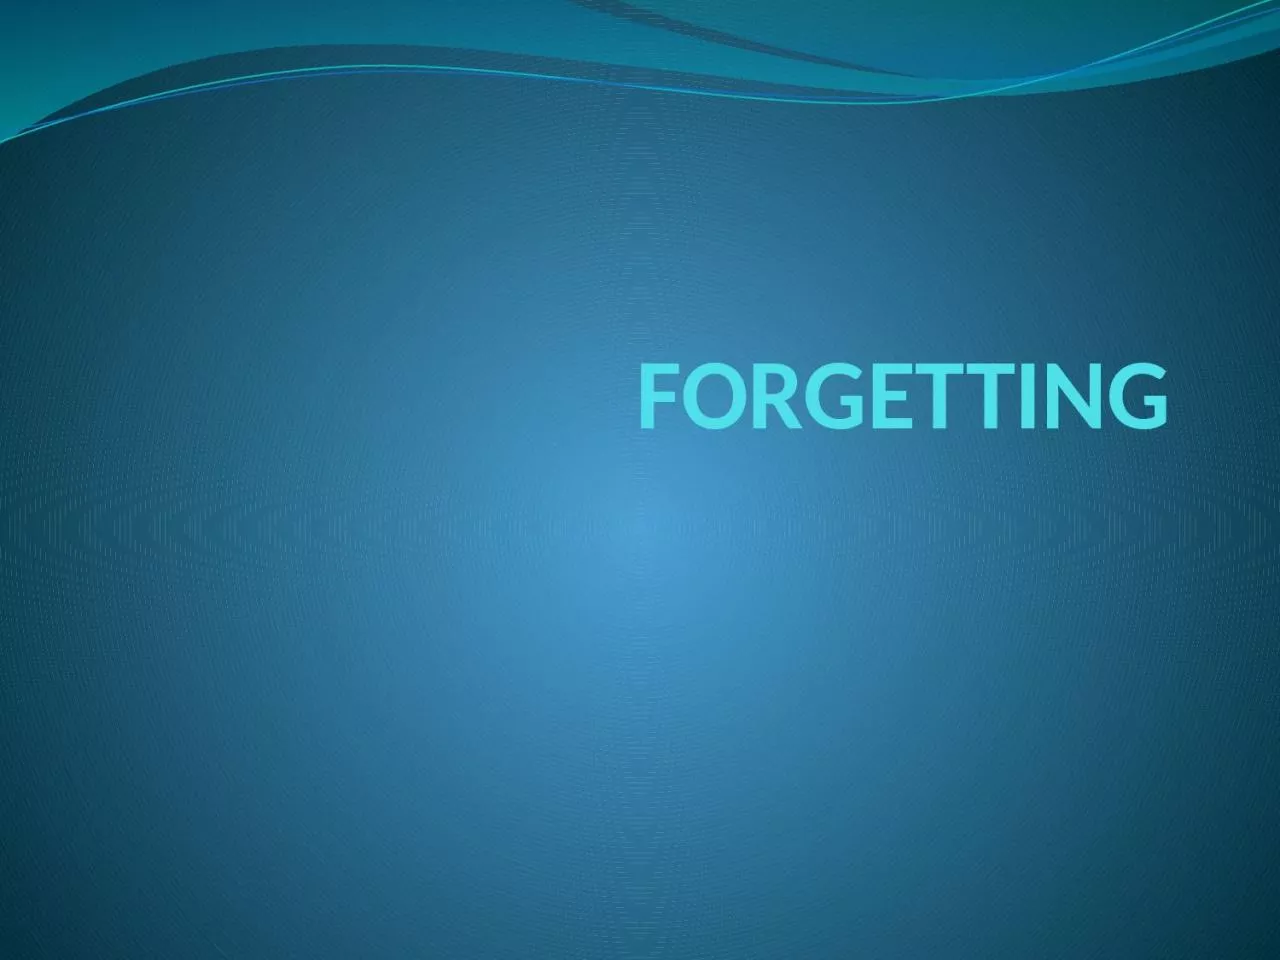 FORGETTING What is forgetting?